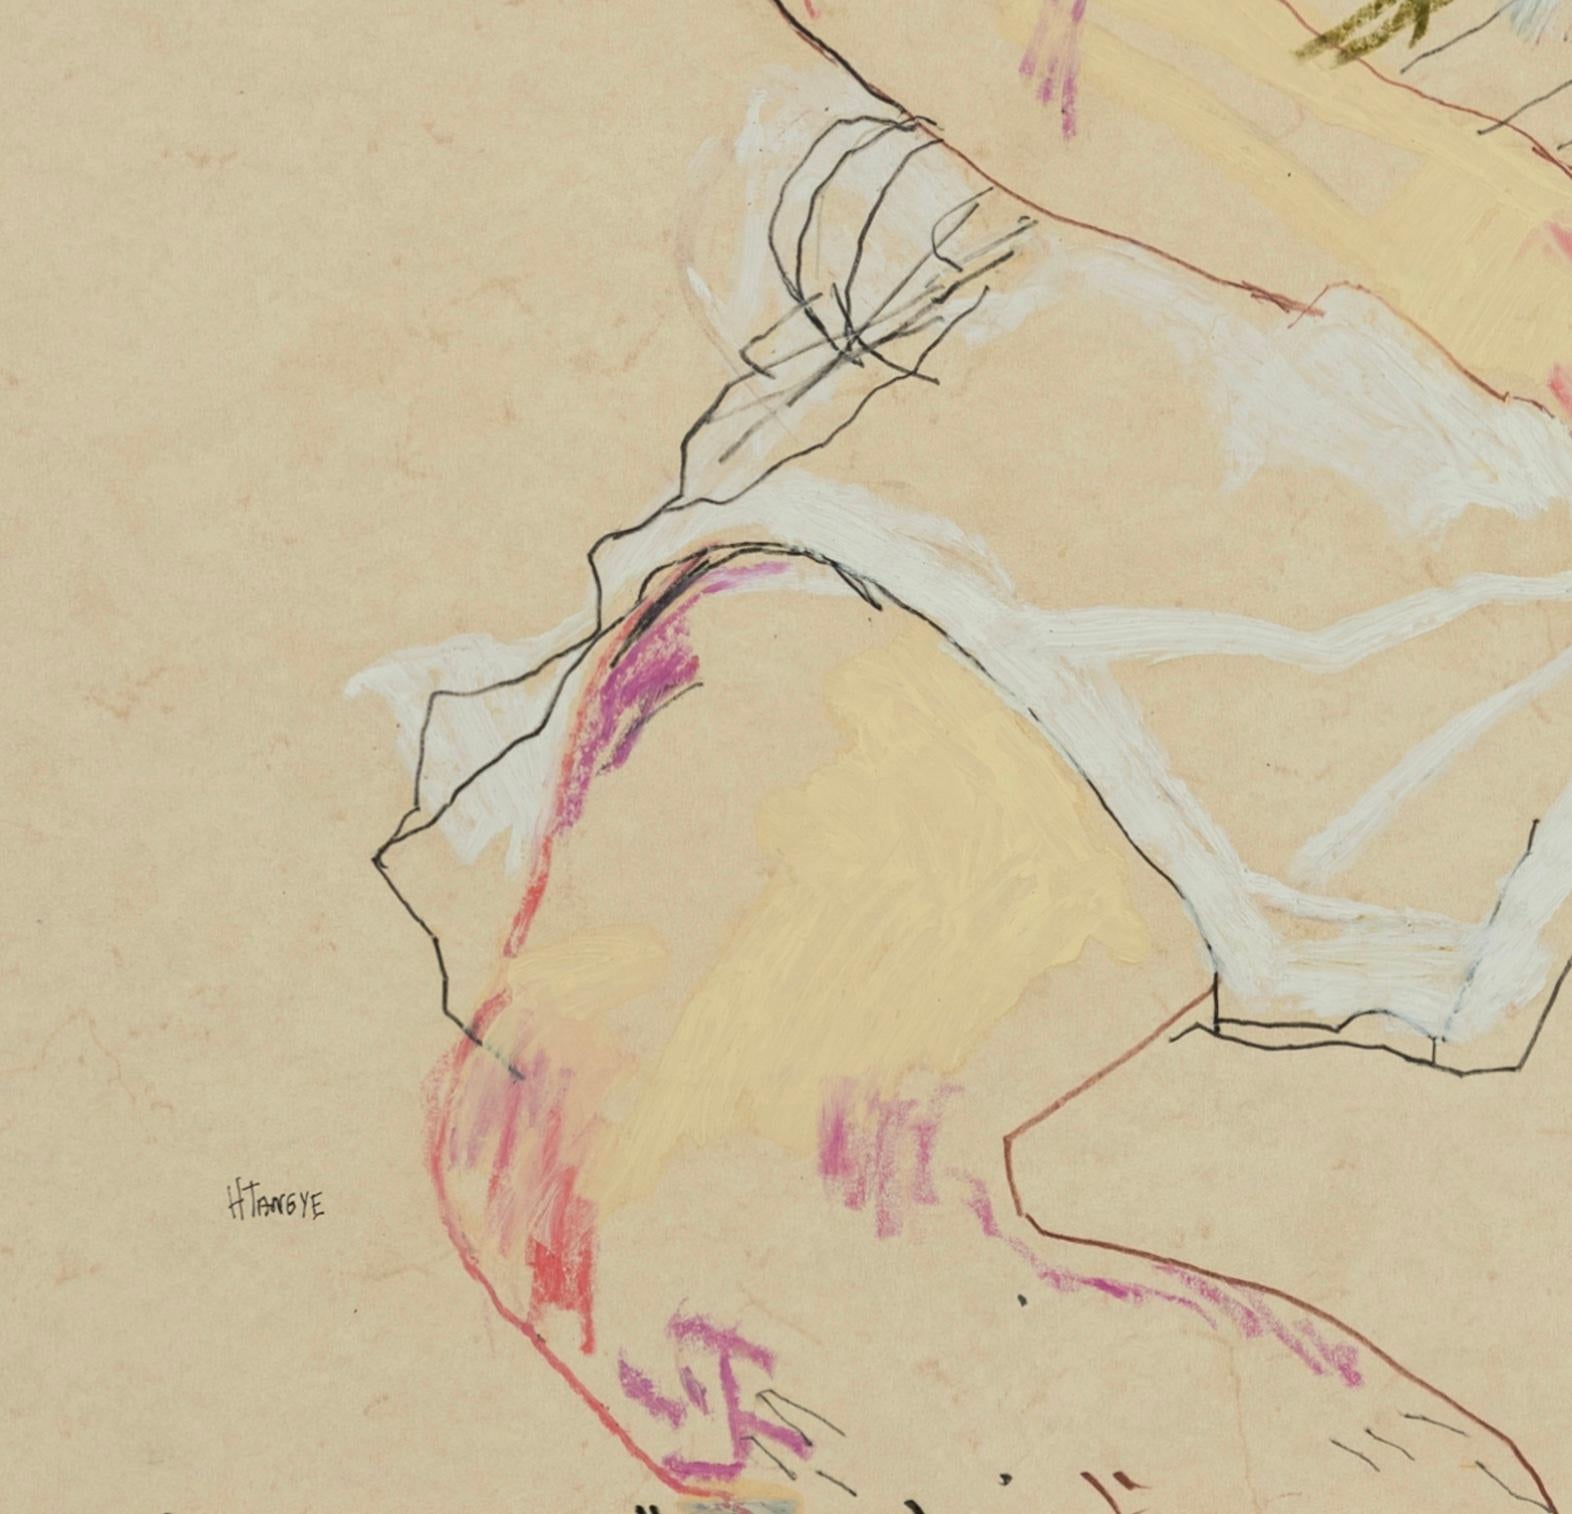 Nobu (Looking Down), Mixed Media on Pergamenata parchment - Beige Figurative Painting by Howard Tangye